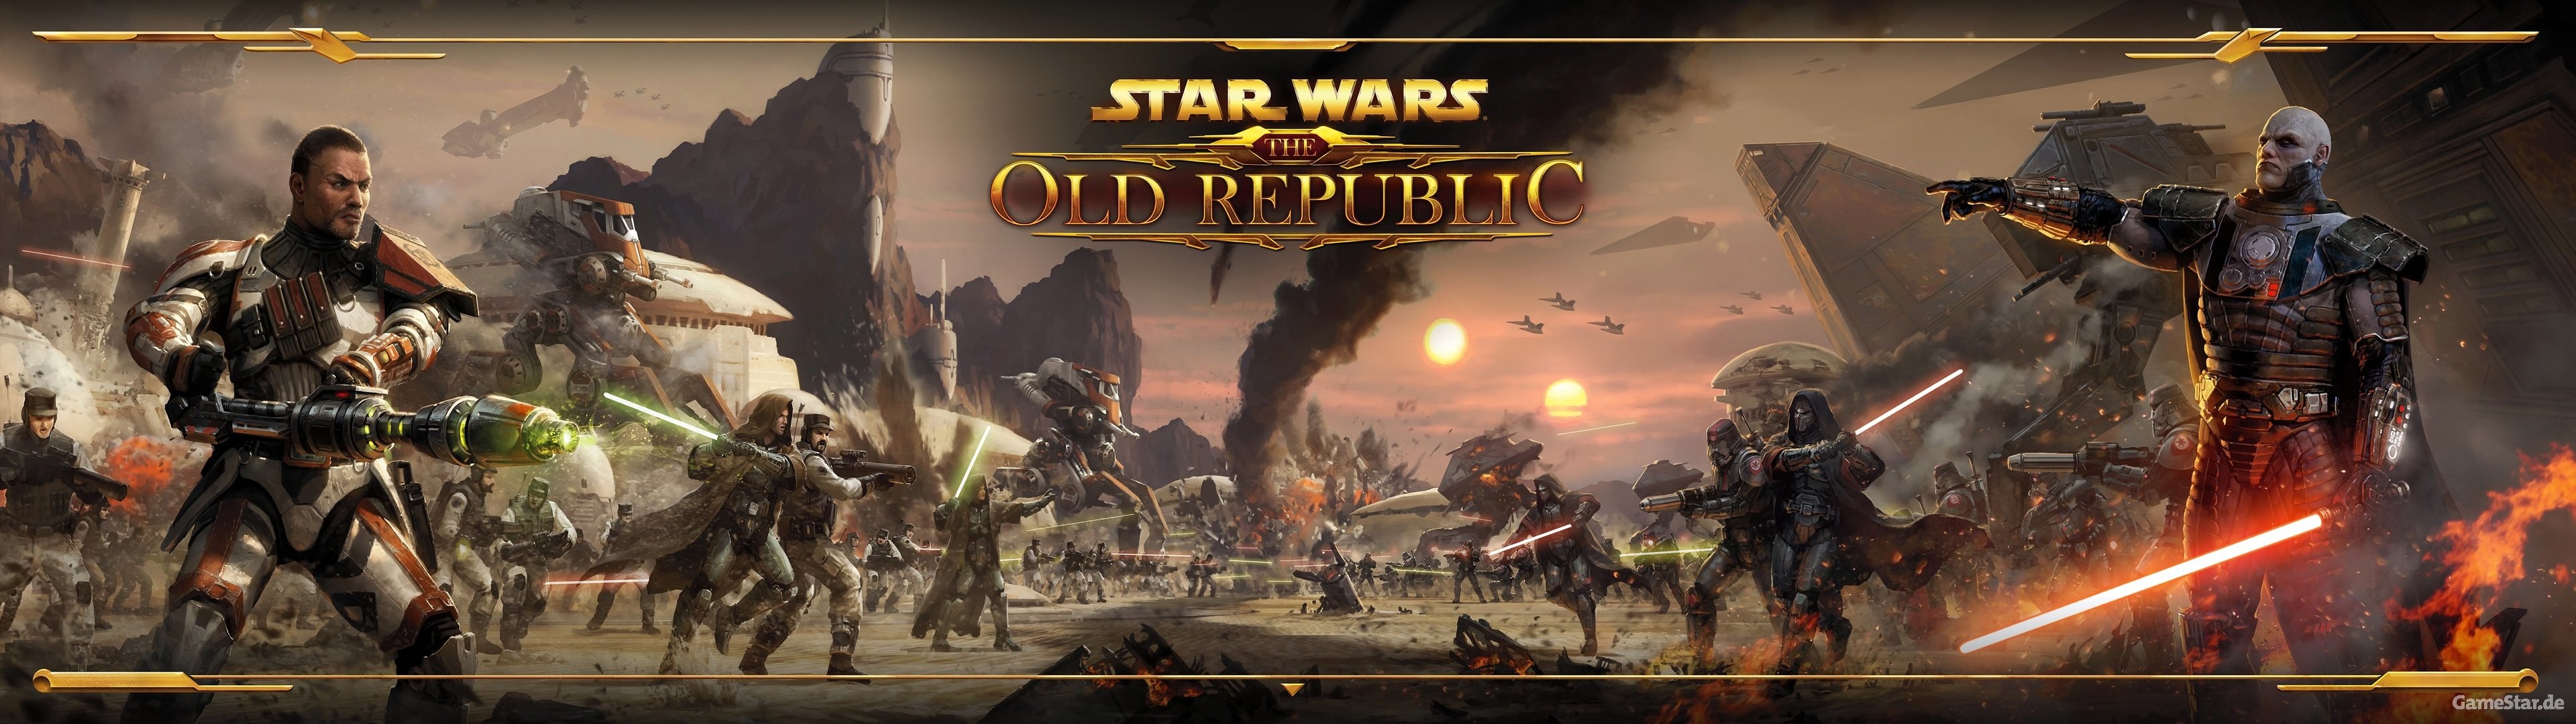 STAR WARS OLD REPUBLIC mmo rpg swtor fighting sci-fi wallpaper |  | 518892 | WallpaperUP